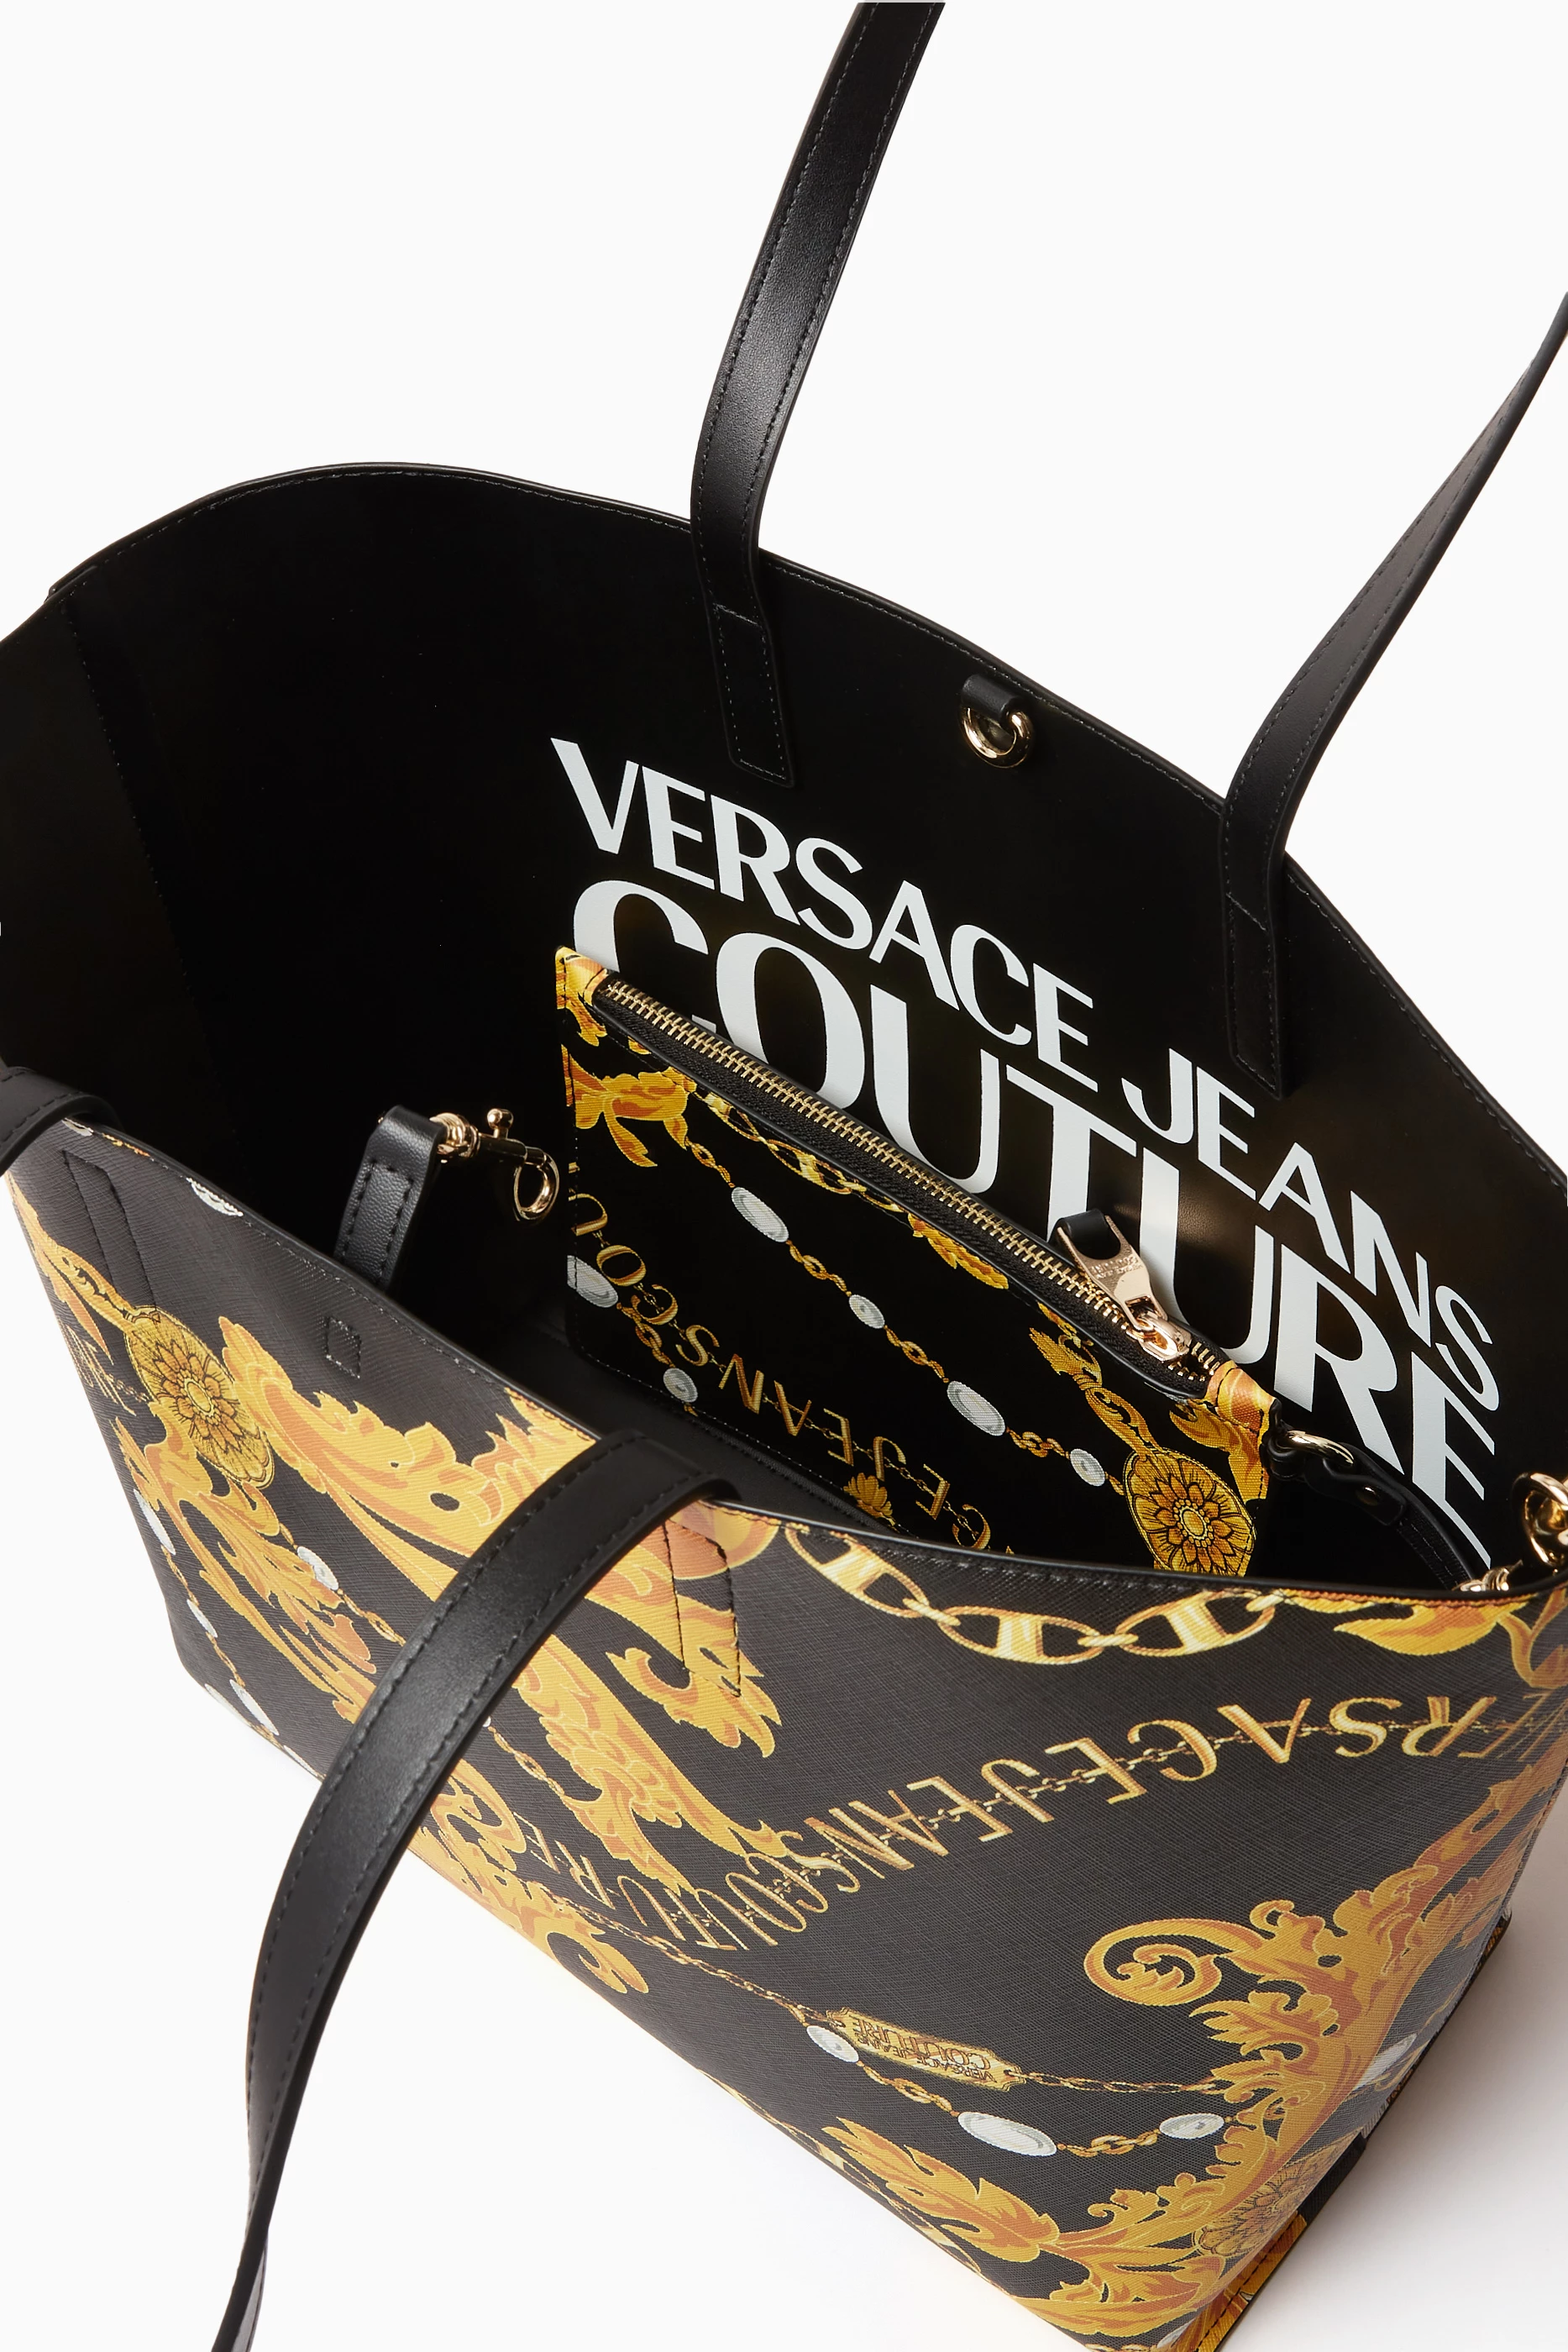 Totes bags Versace Jeans Couture - Reversible eco leather tote -  E1VVBB5071501899